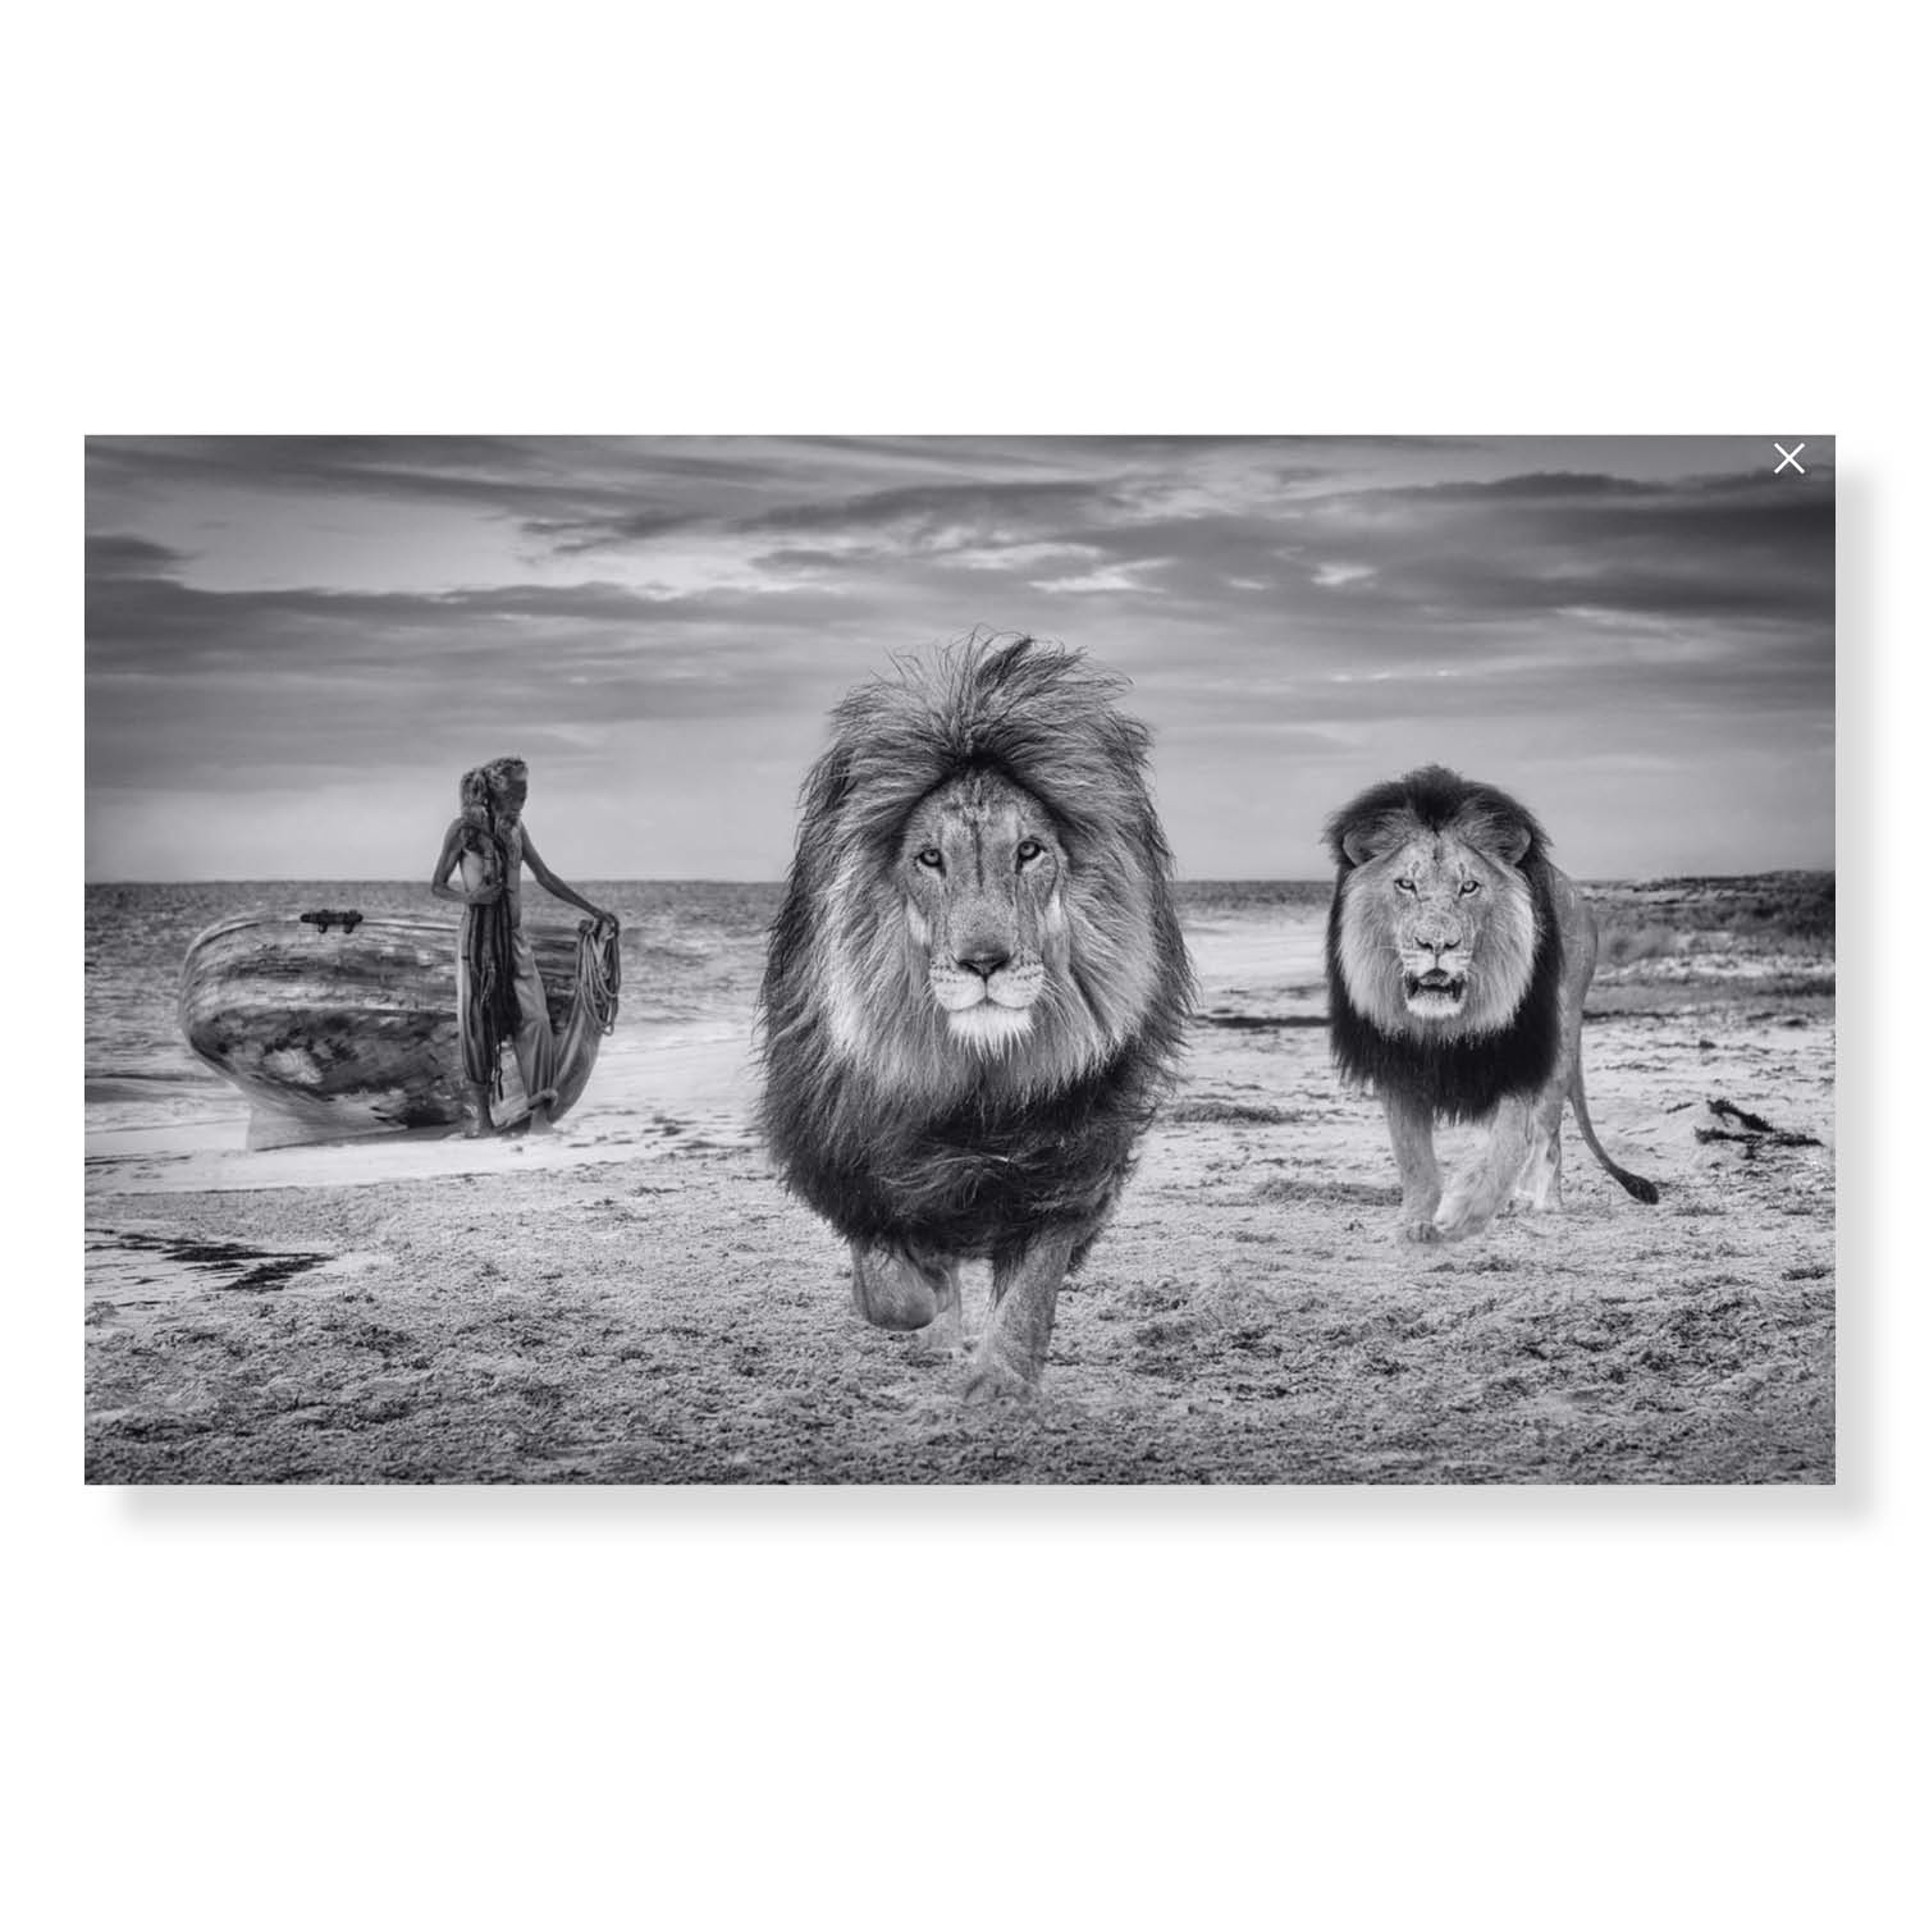 The Old Man and The Sea by David Yarrow